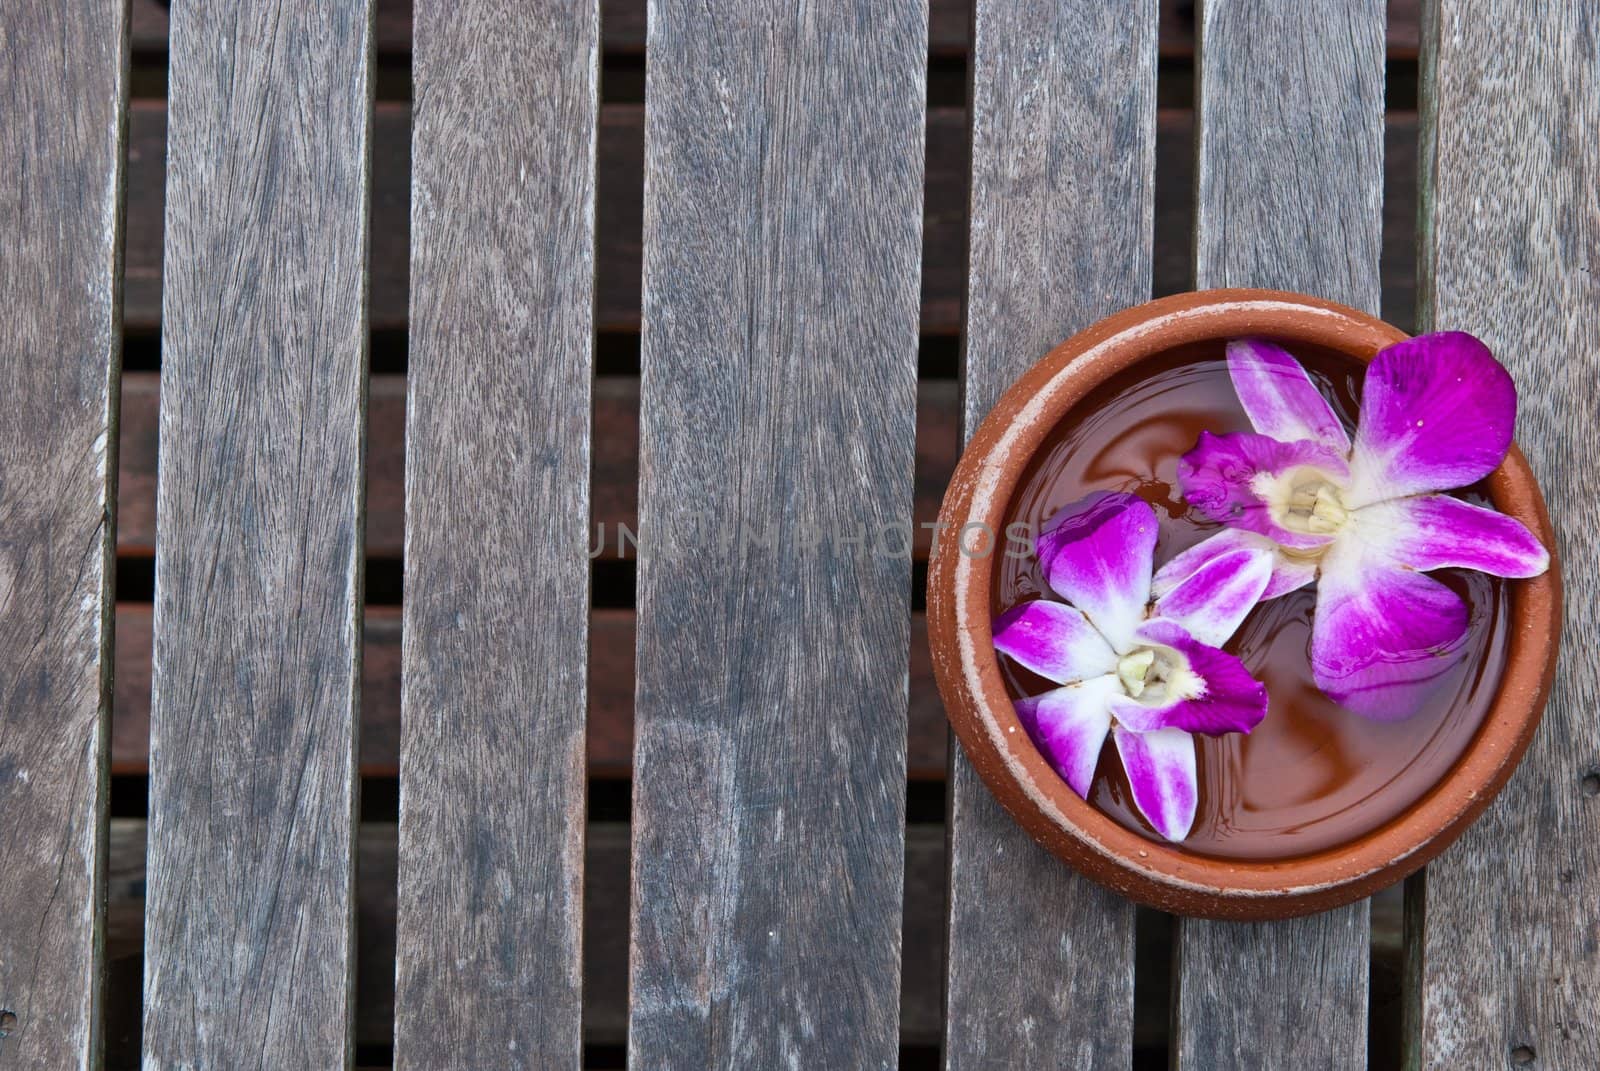 Thai orchid on wood platform with water on top, can be use for health and beauty related concepts
